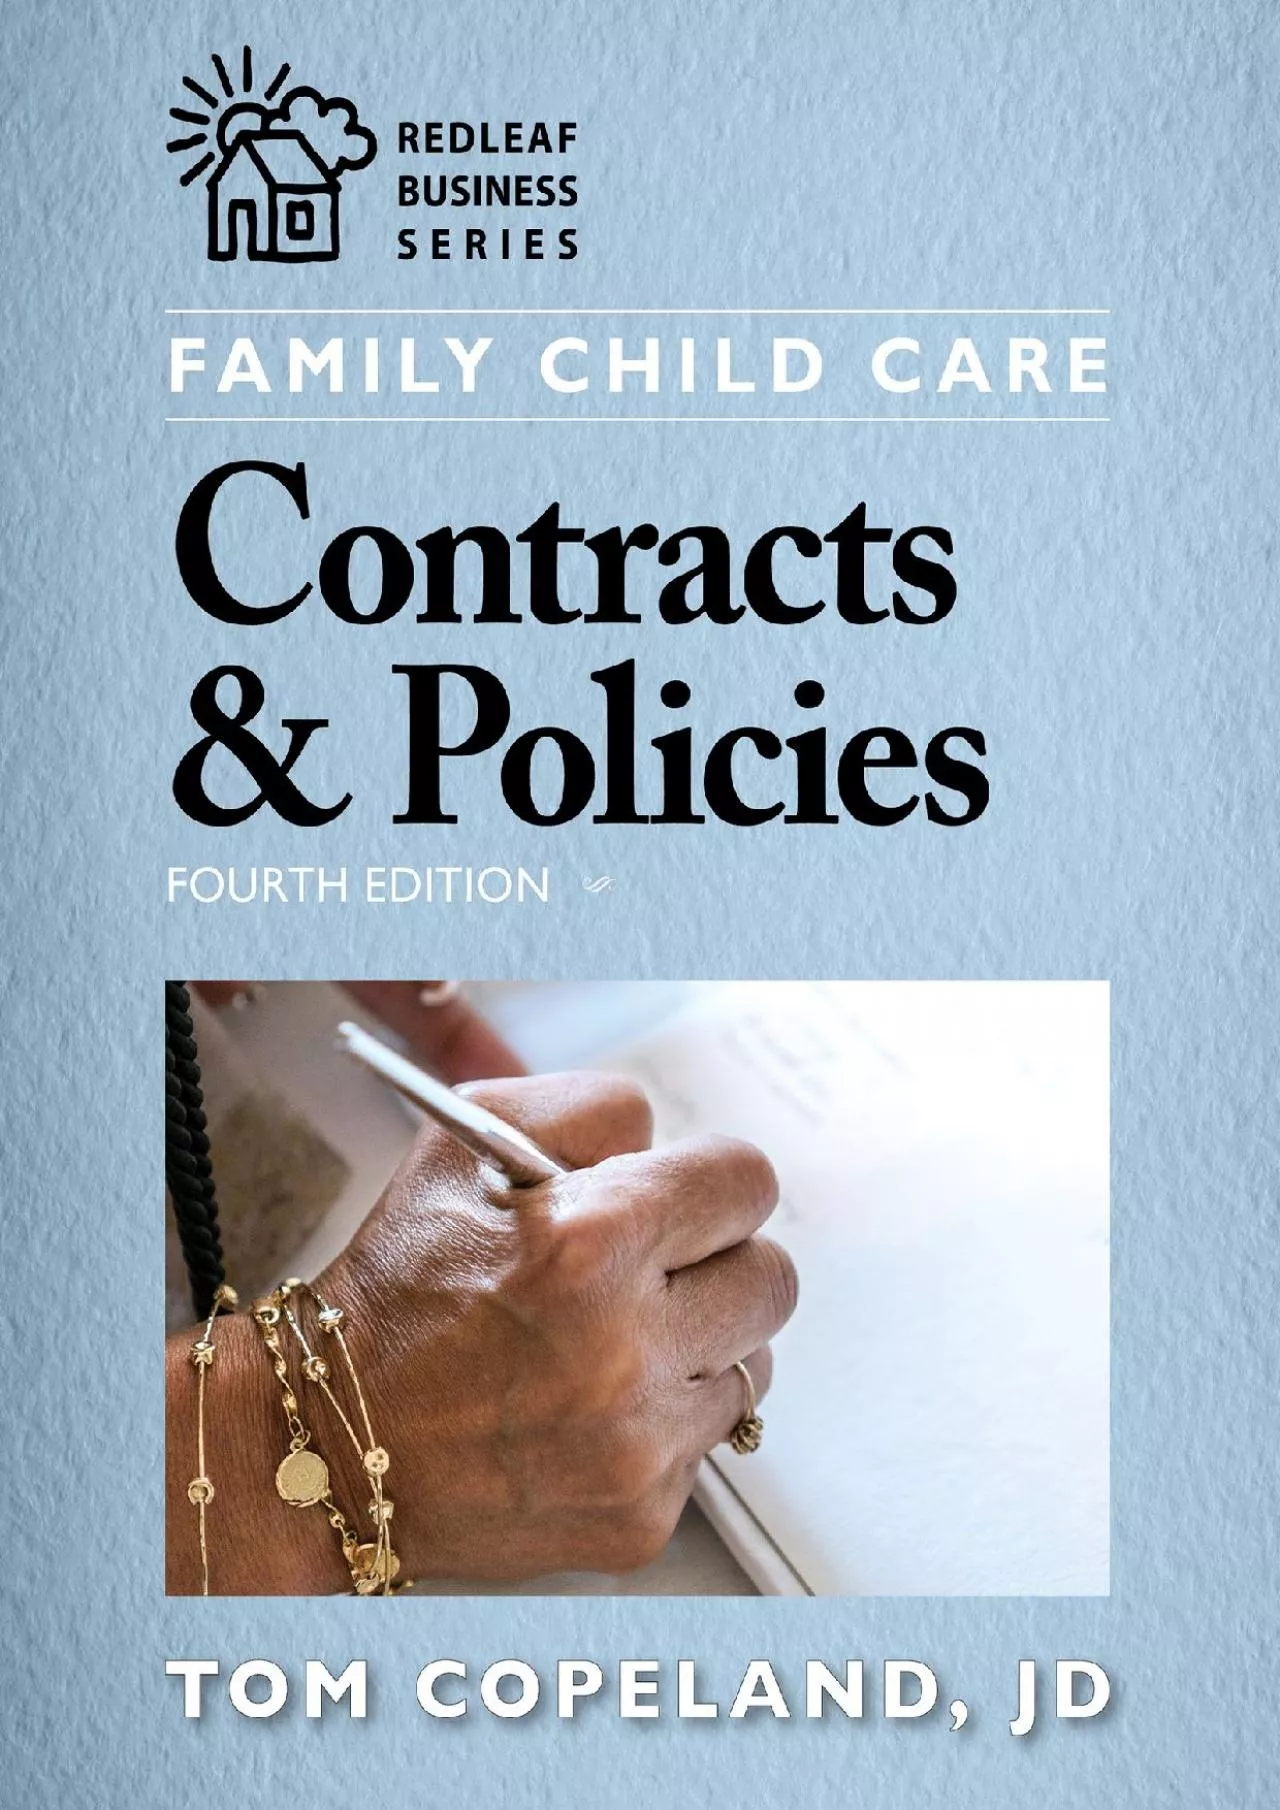 (BOOS)-Family Child Care Contracts & Policies, Fourth Edition (Redleaf Press Business